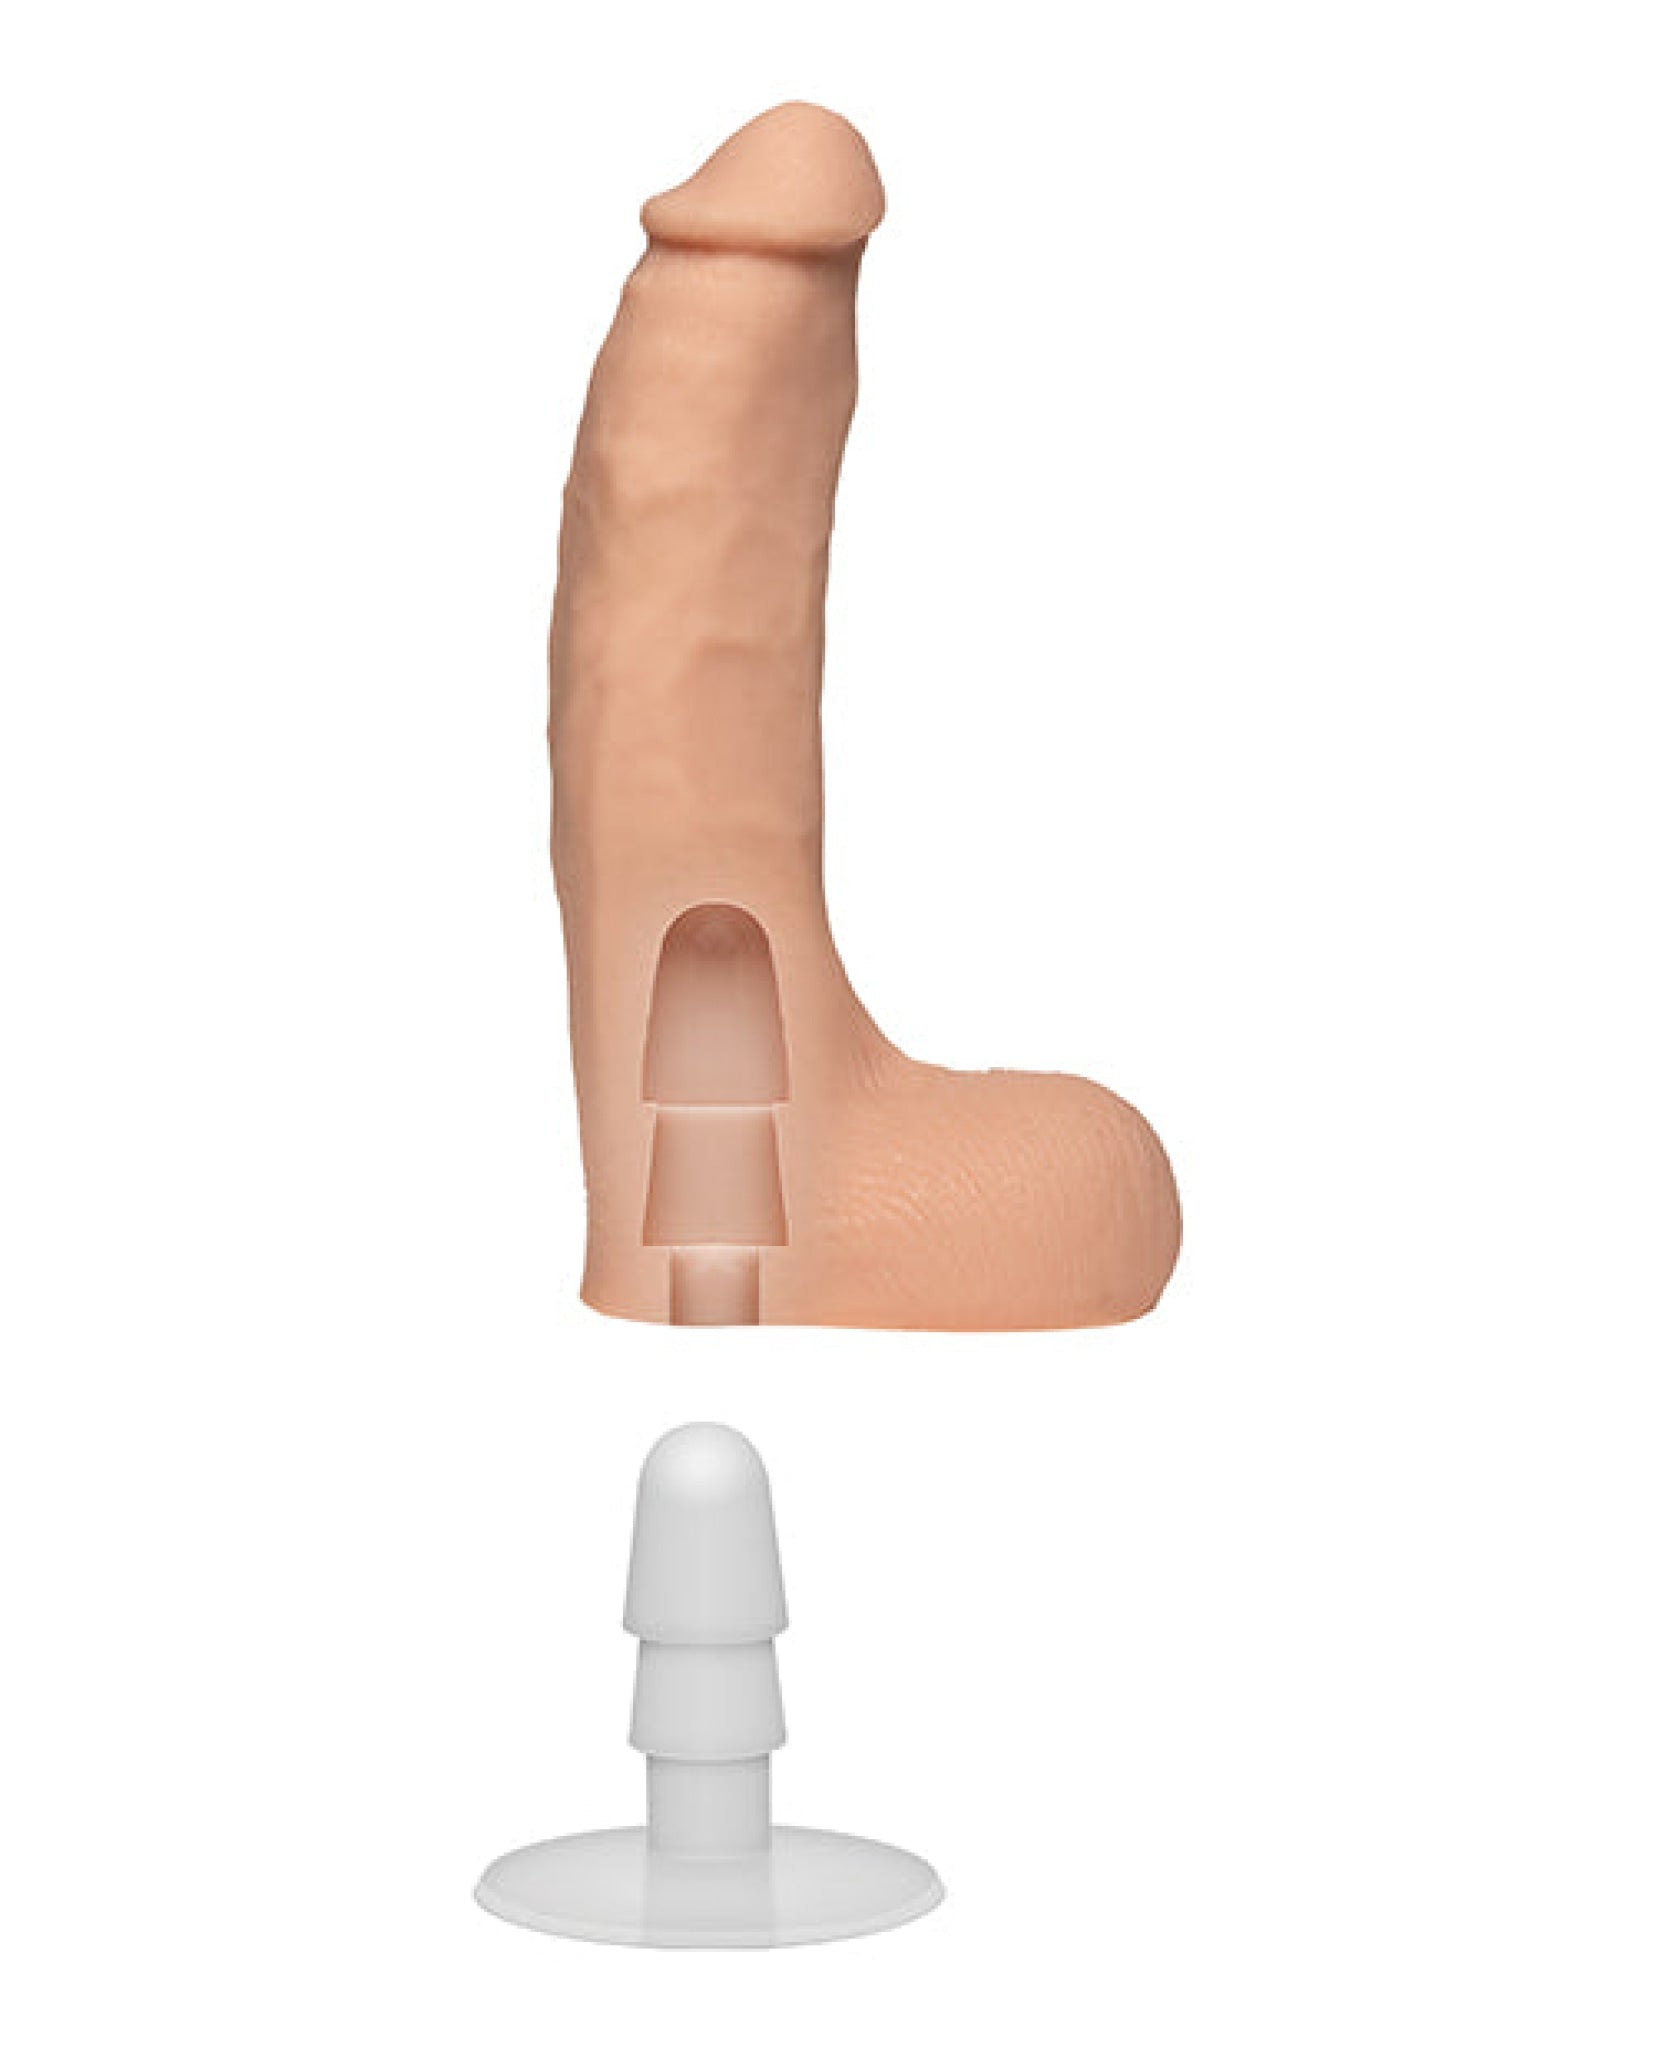 Signature Cocks Ultraskyn 8.5" Cock W-removable Vac-u-lock Suction Cup - Chad White Doc Johnson